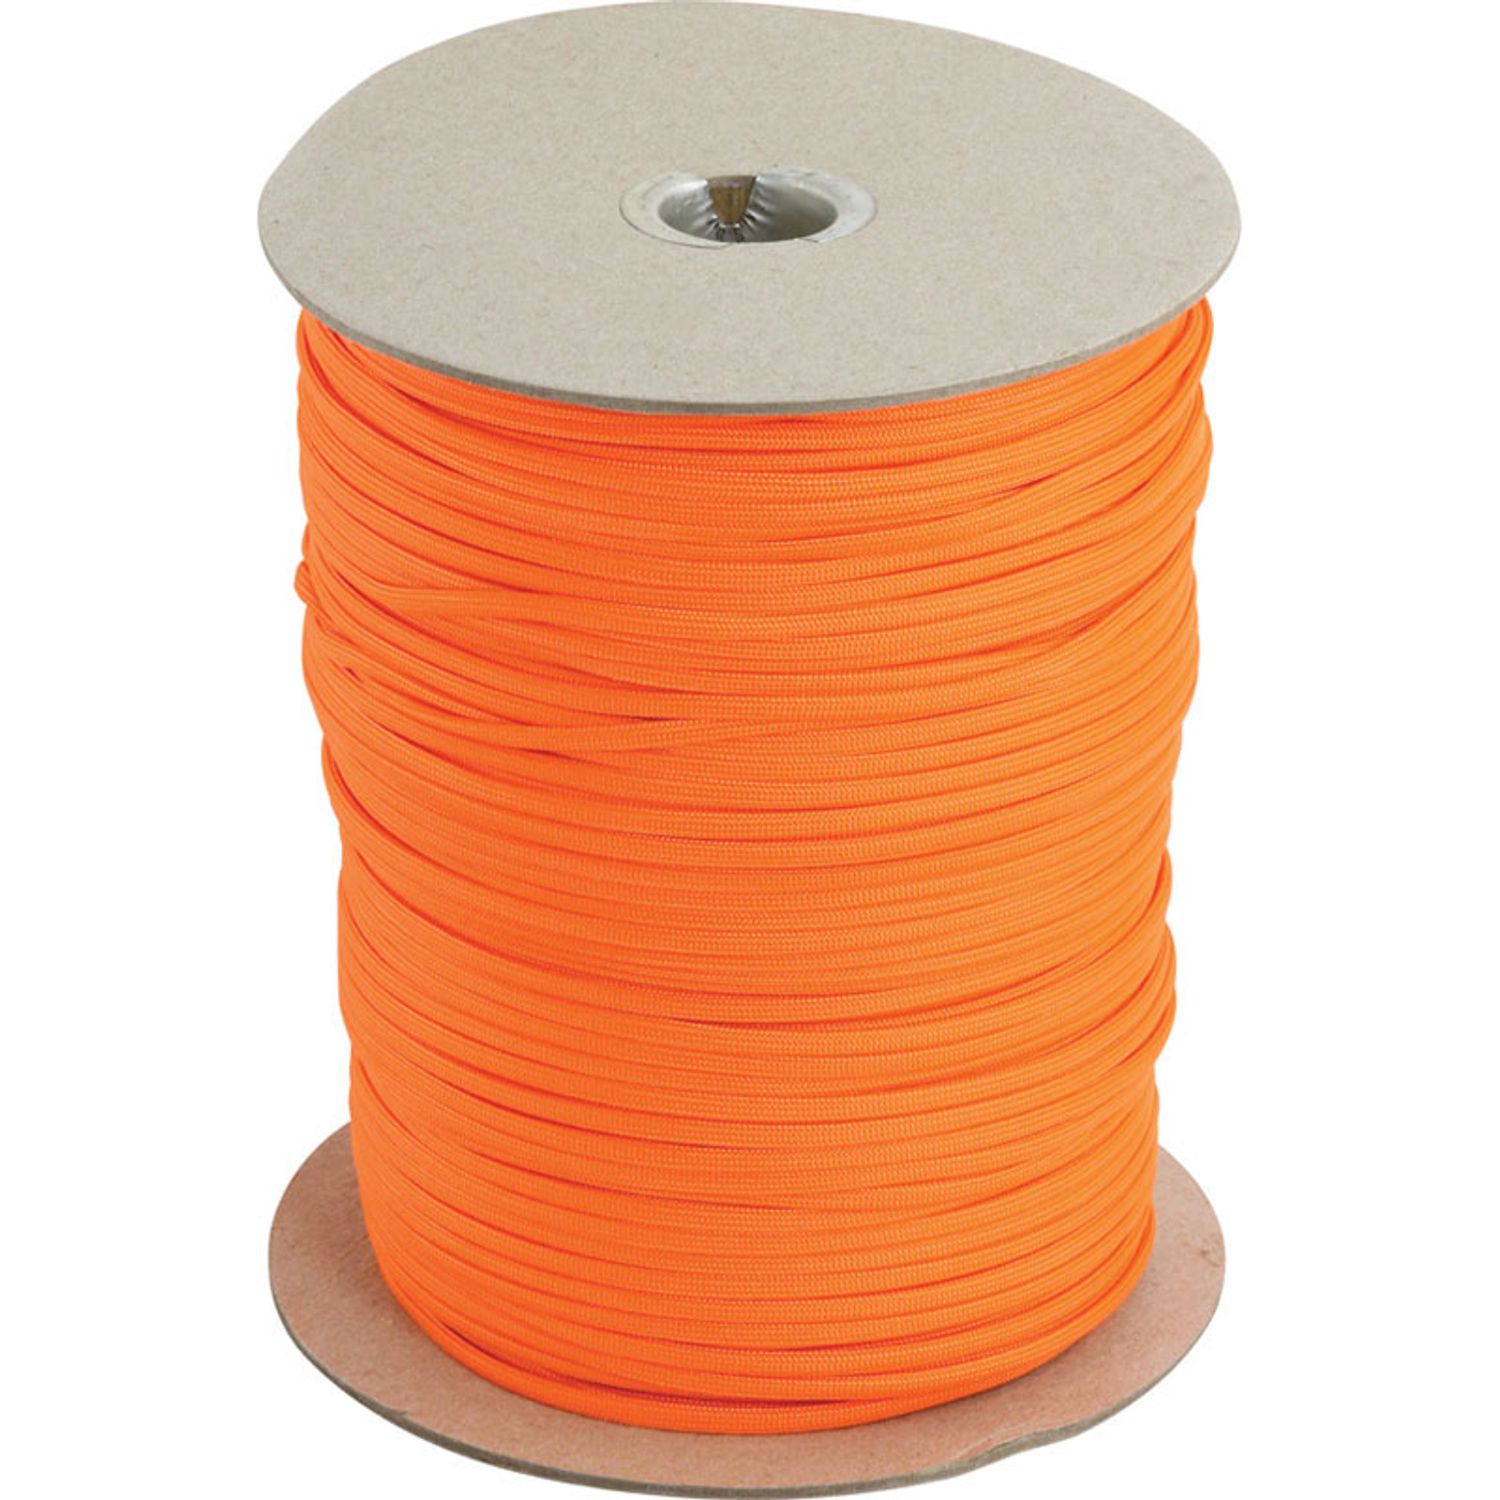 Atwood Rope 550 Paracord, Neon Orange, 1000 Foot Roll